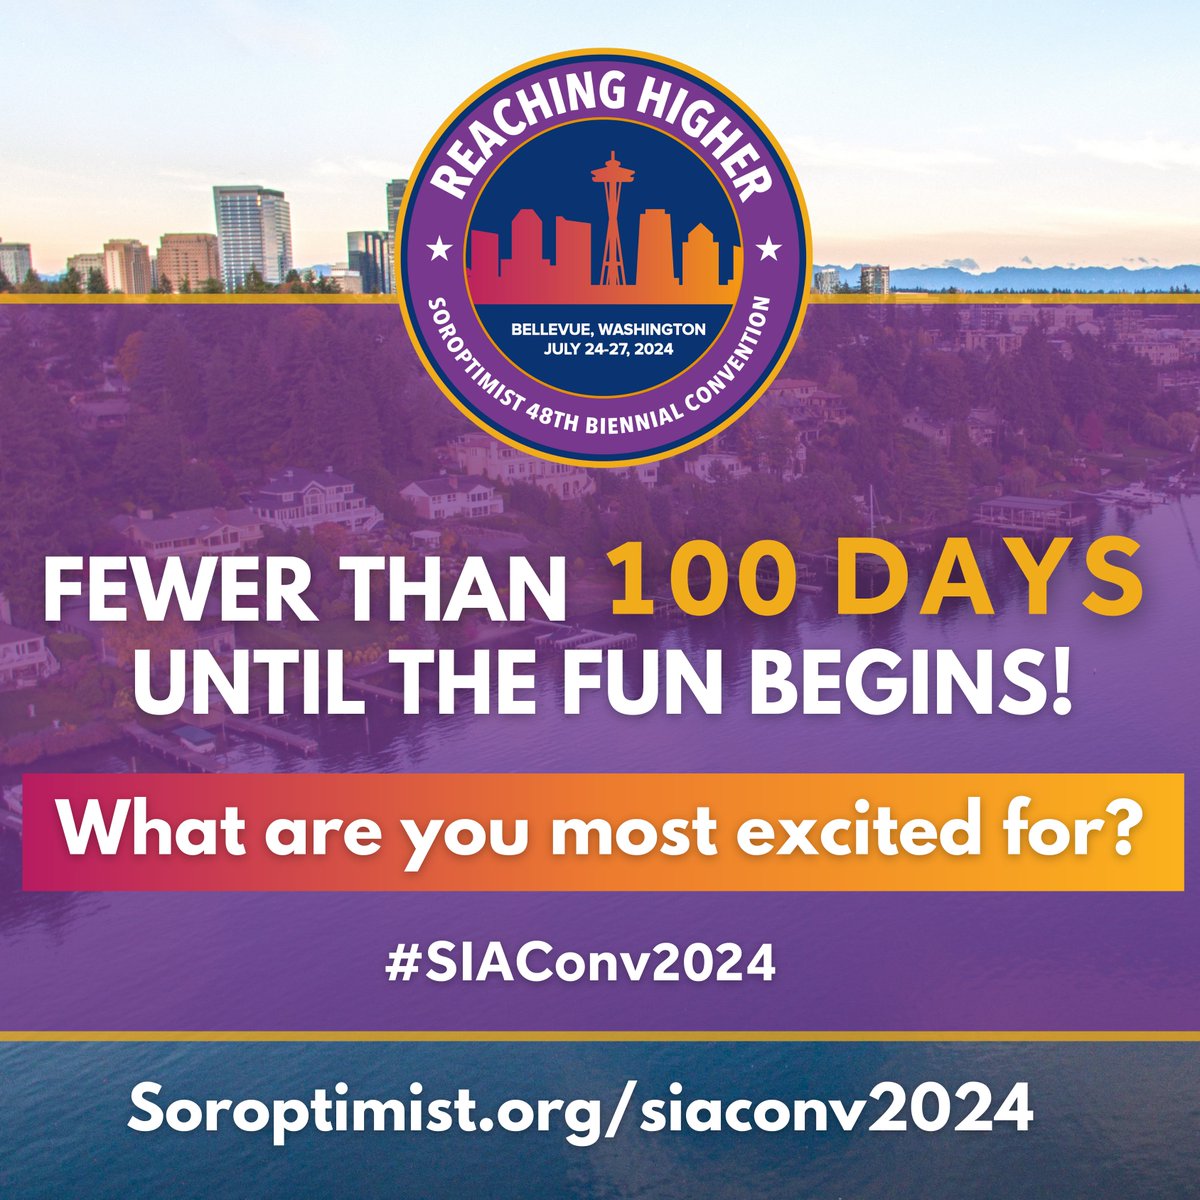 Just a little under 100 days until Soroptimist's 48th Biennial Convention! What are you most excited for? Let us know! We are excited to meet in-person again 🌟 #SIAConv2024 soroptimist.org/siaconv2024